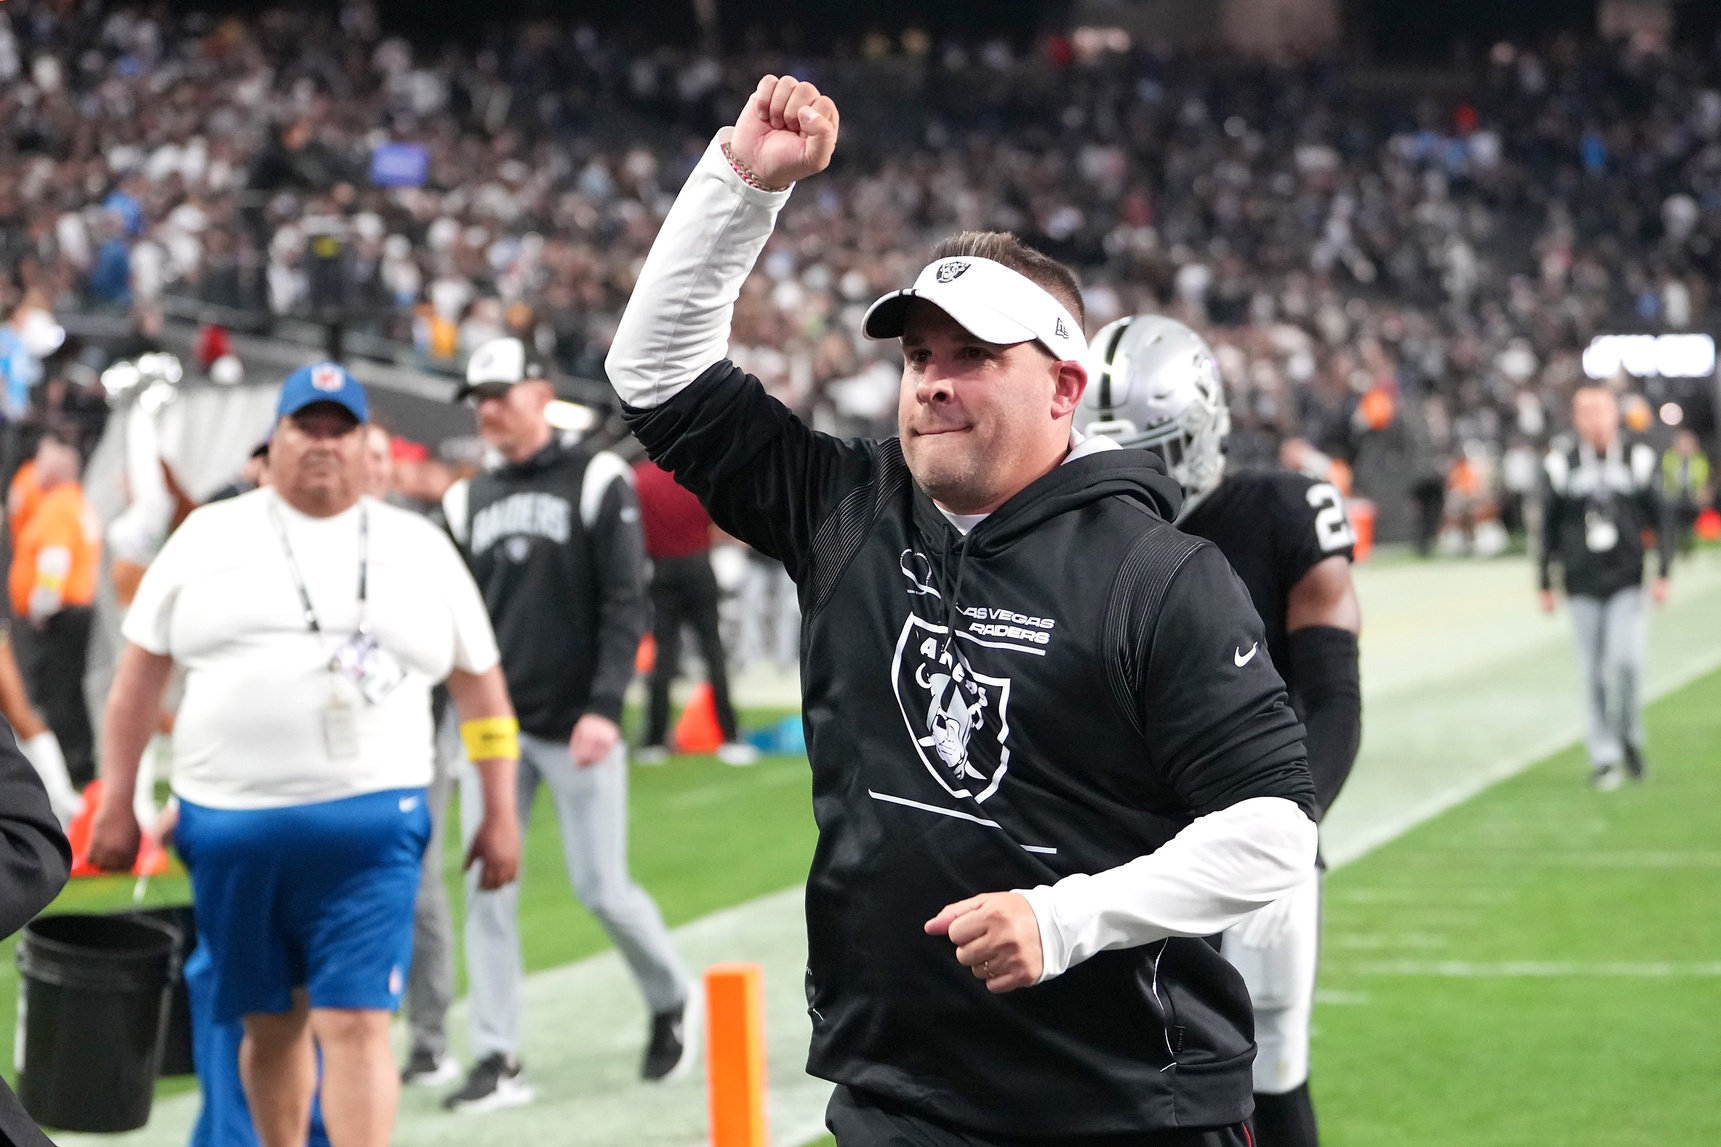 VeGaS iS nOt GoInG tO hAvE a HoMe FiElD aDvAnTaGe!!! : r/raiders